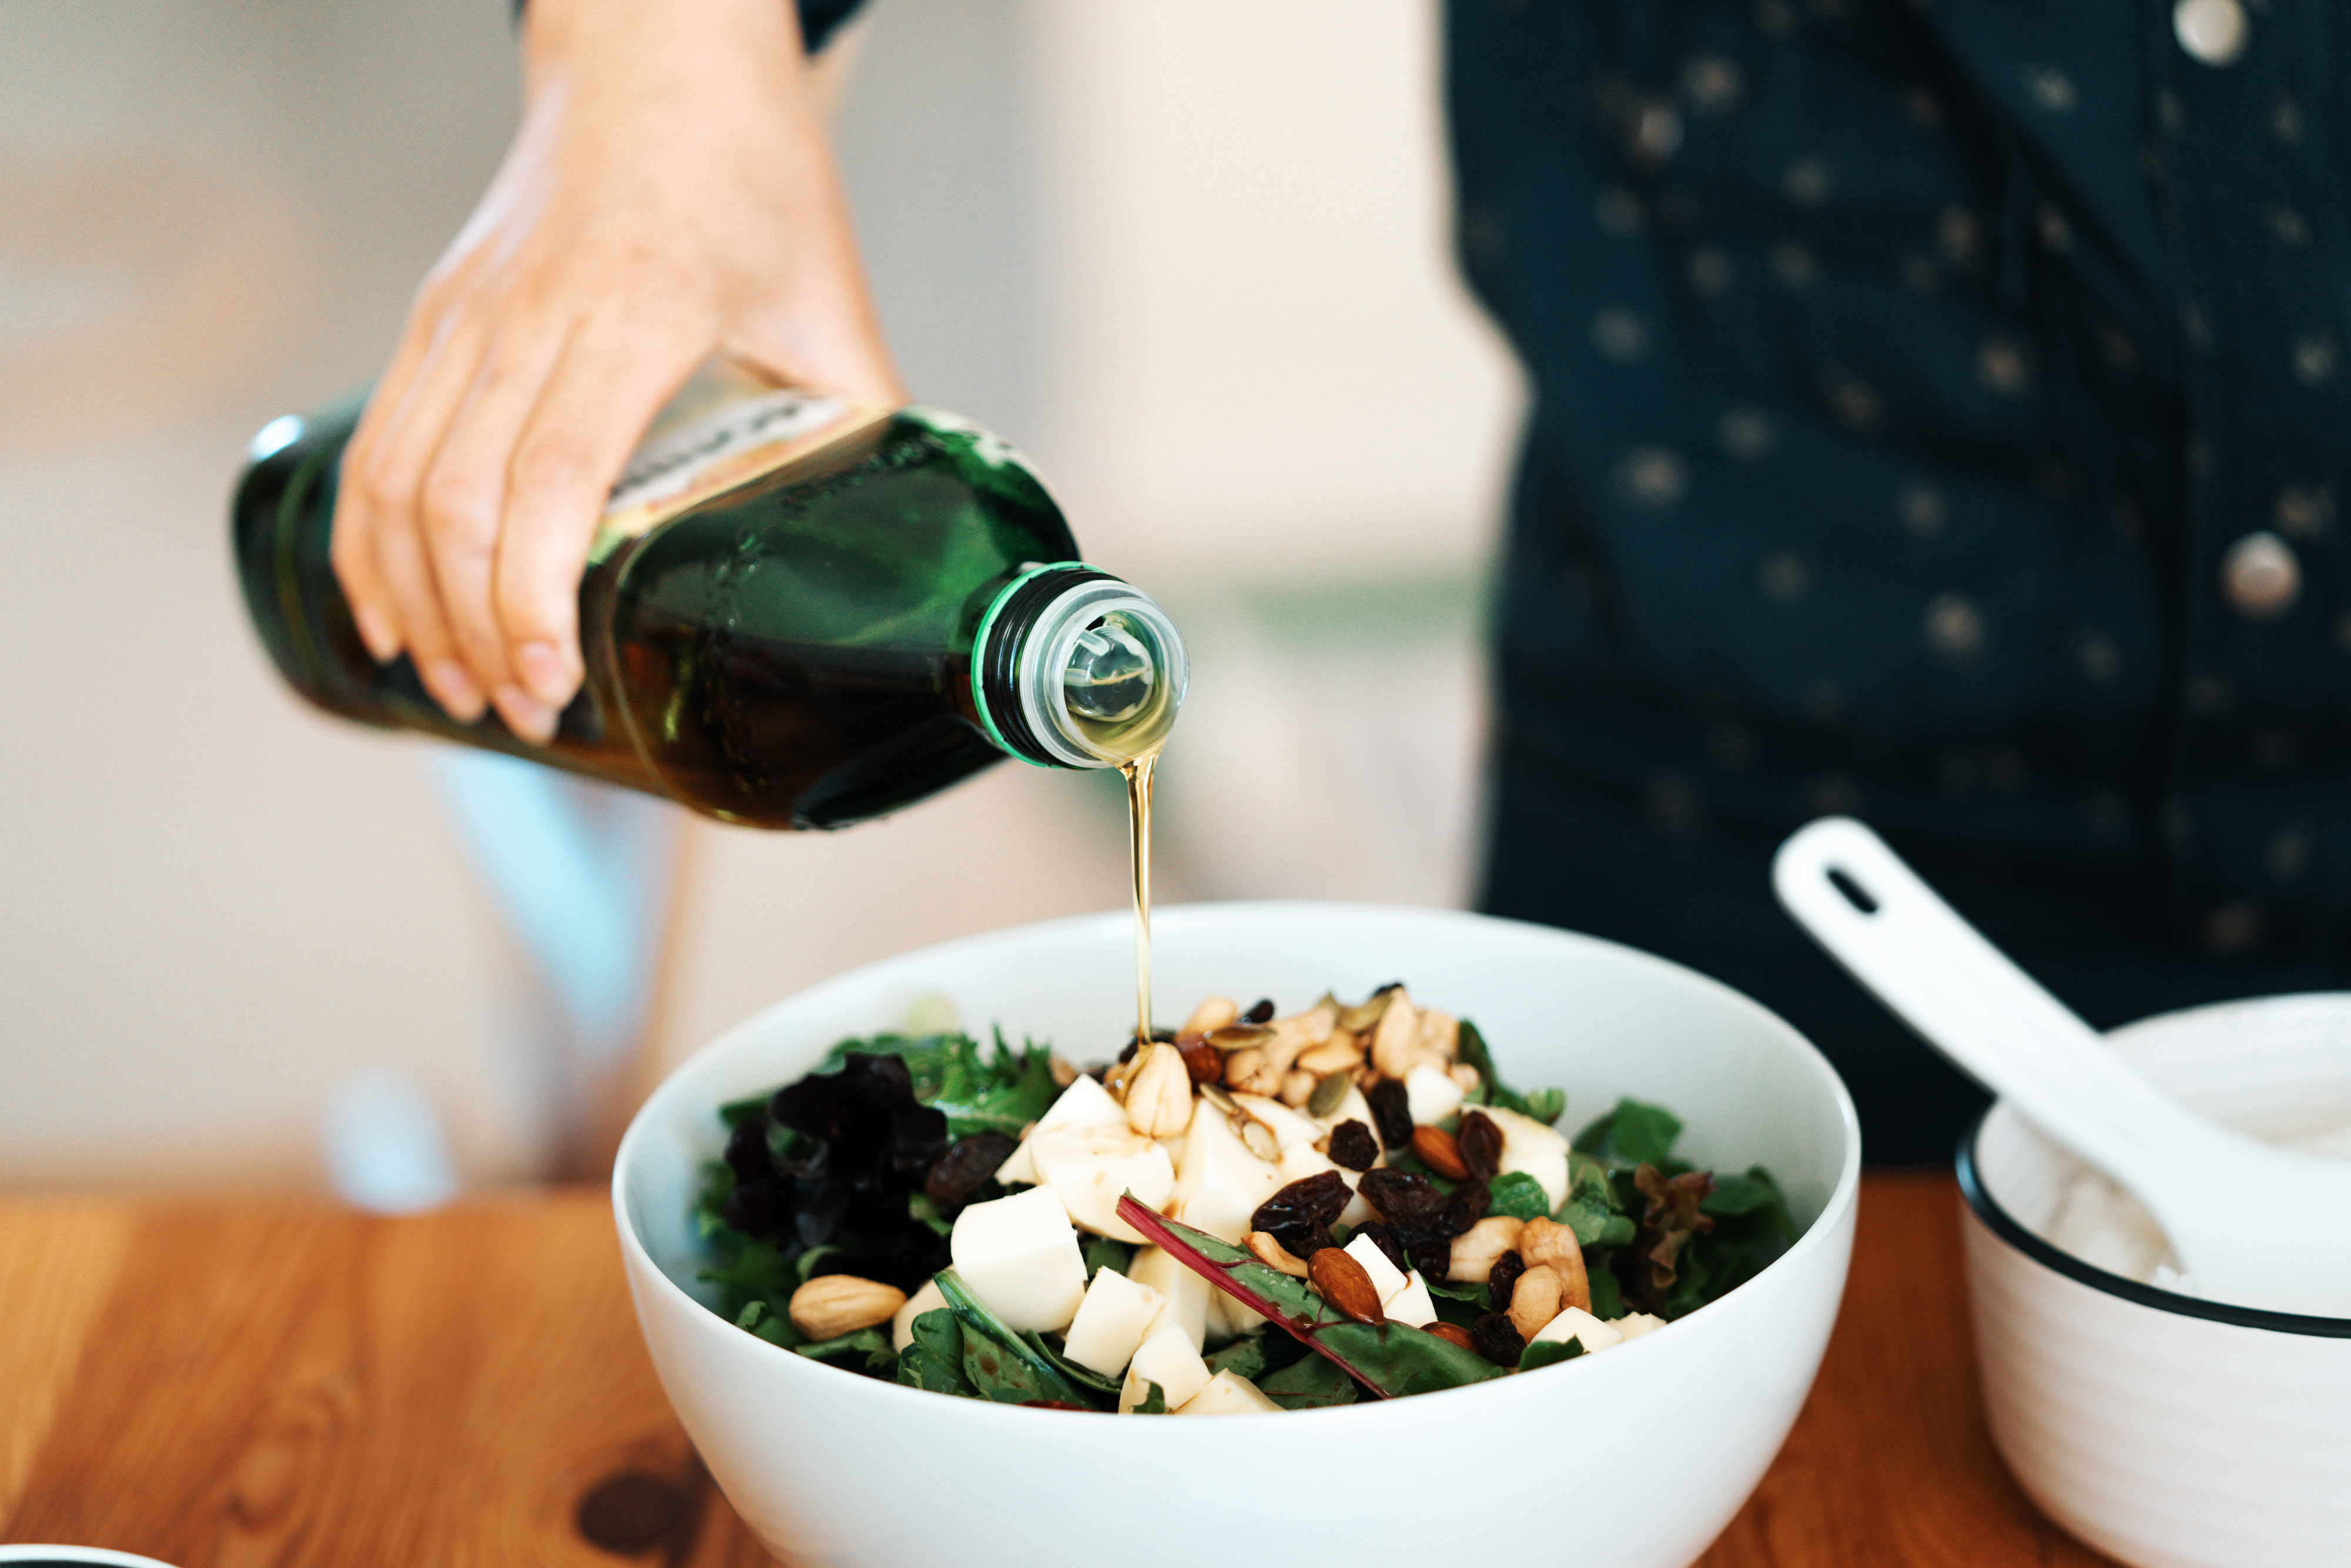 Person pouring olive oil on a salad with nuts and apples